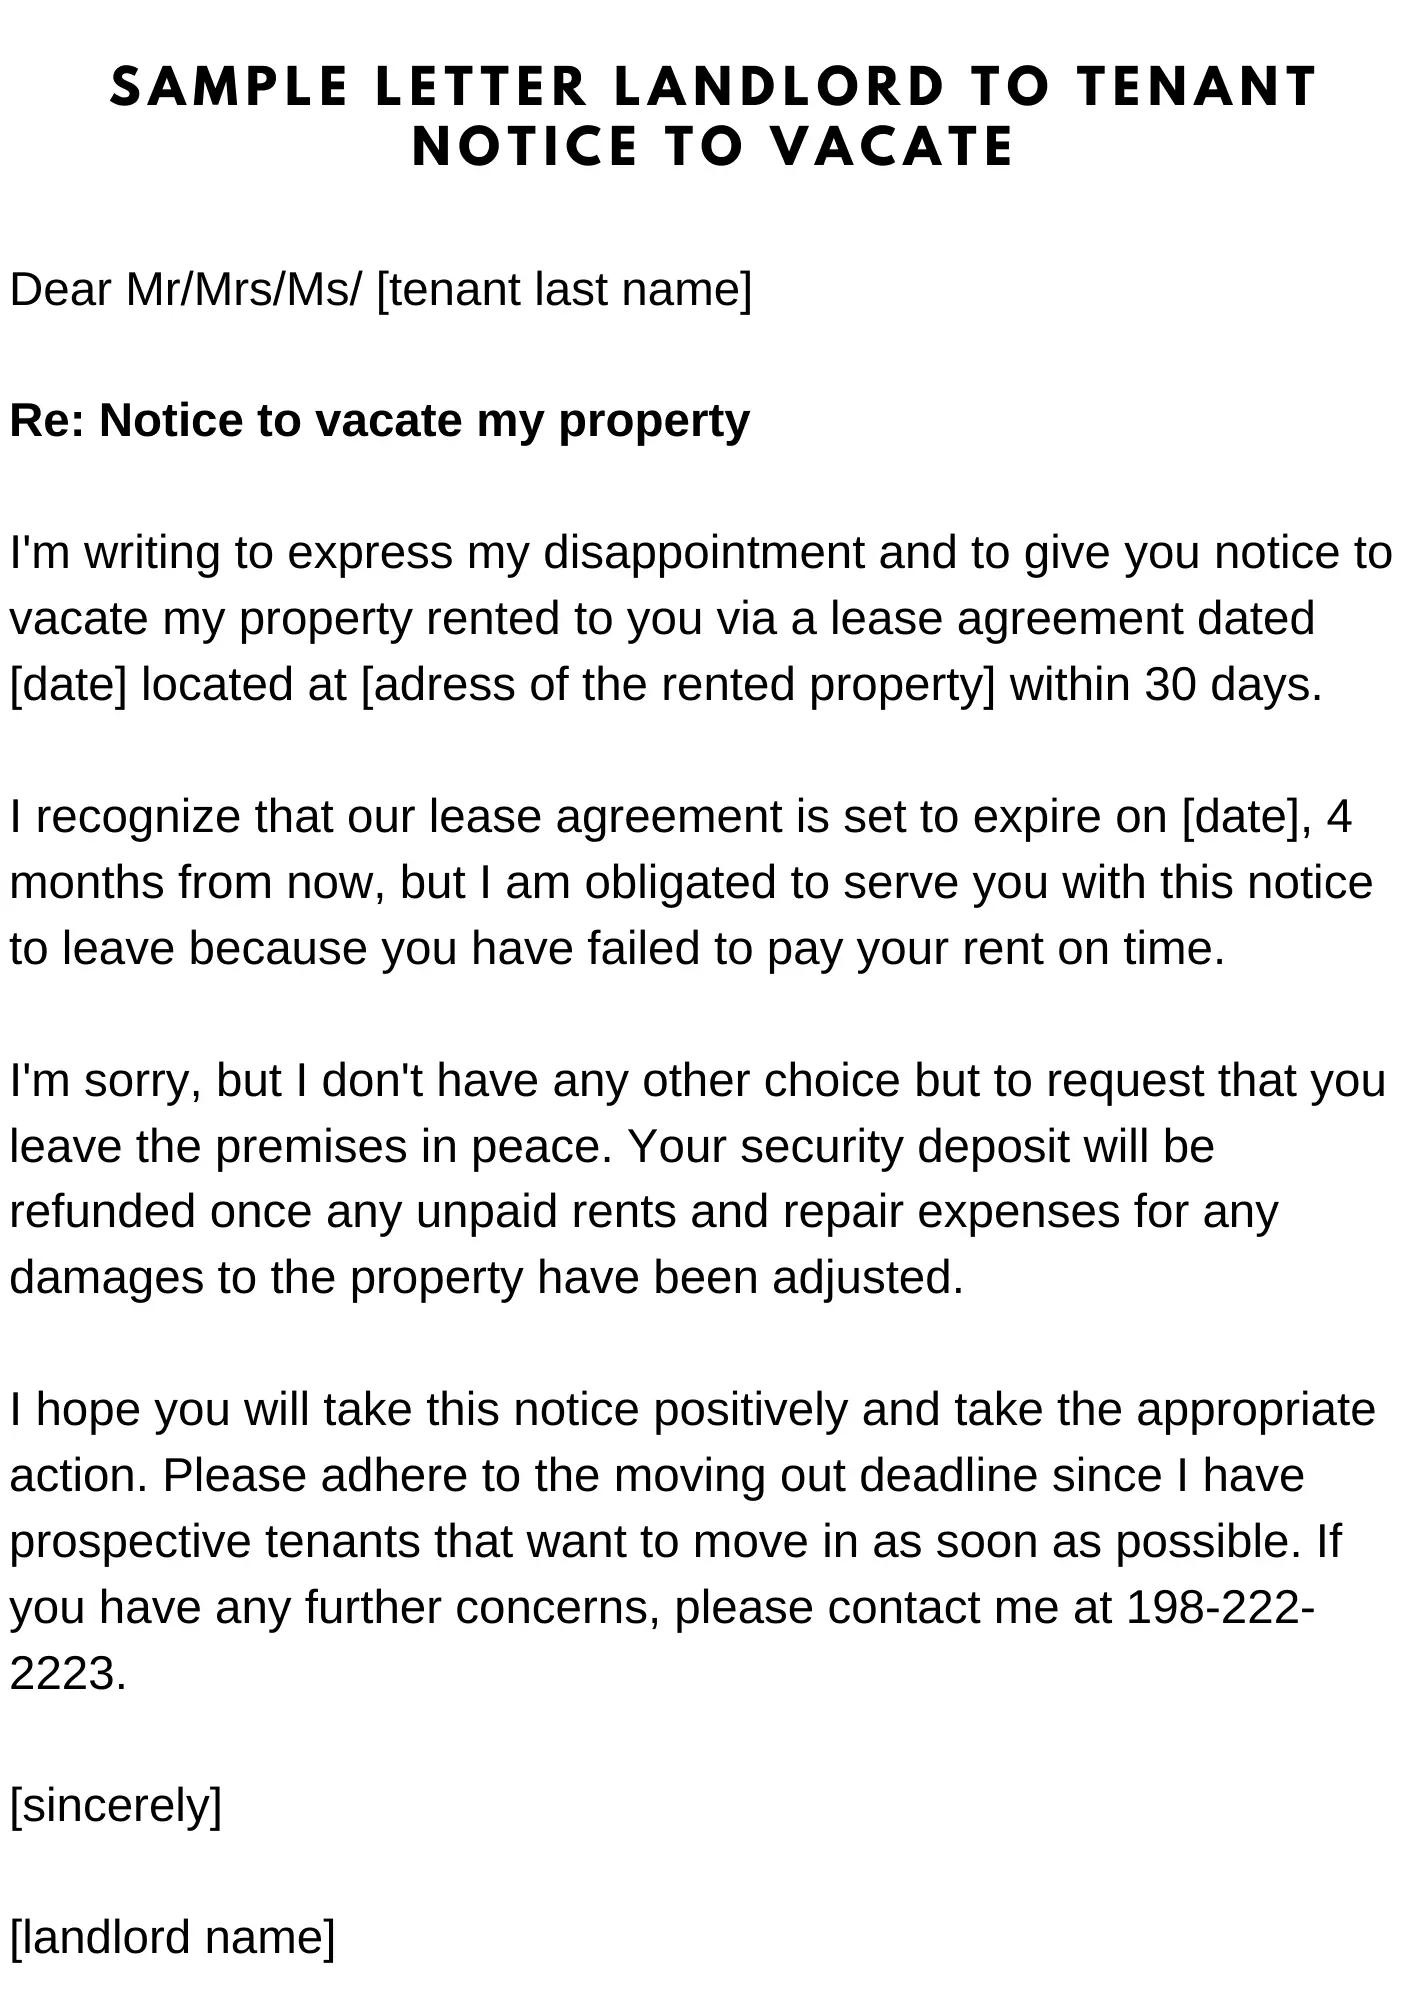 Notice to vacate letter, Notice to vacate template, Notice to vacate sample